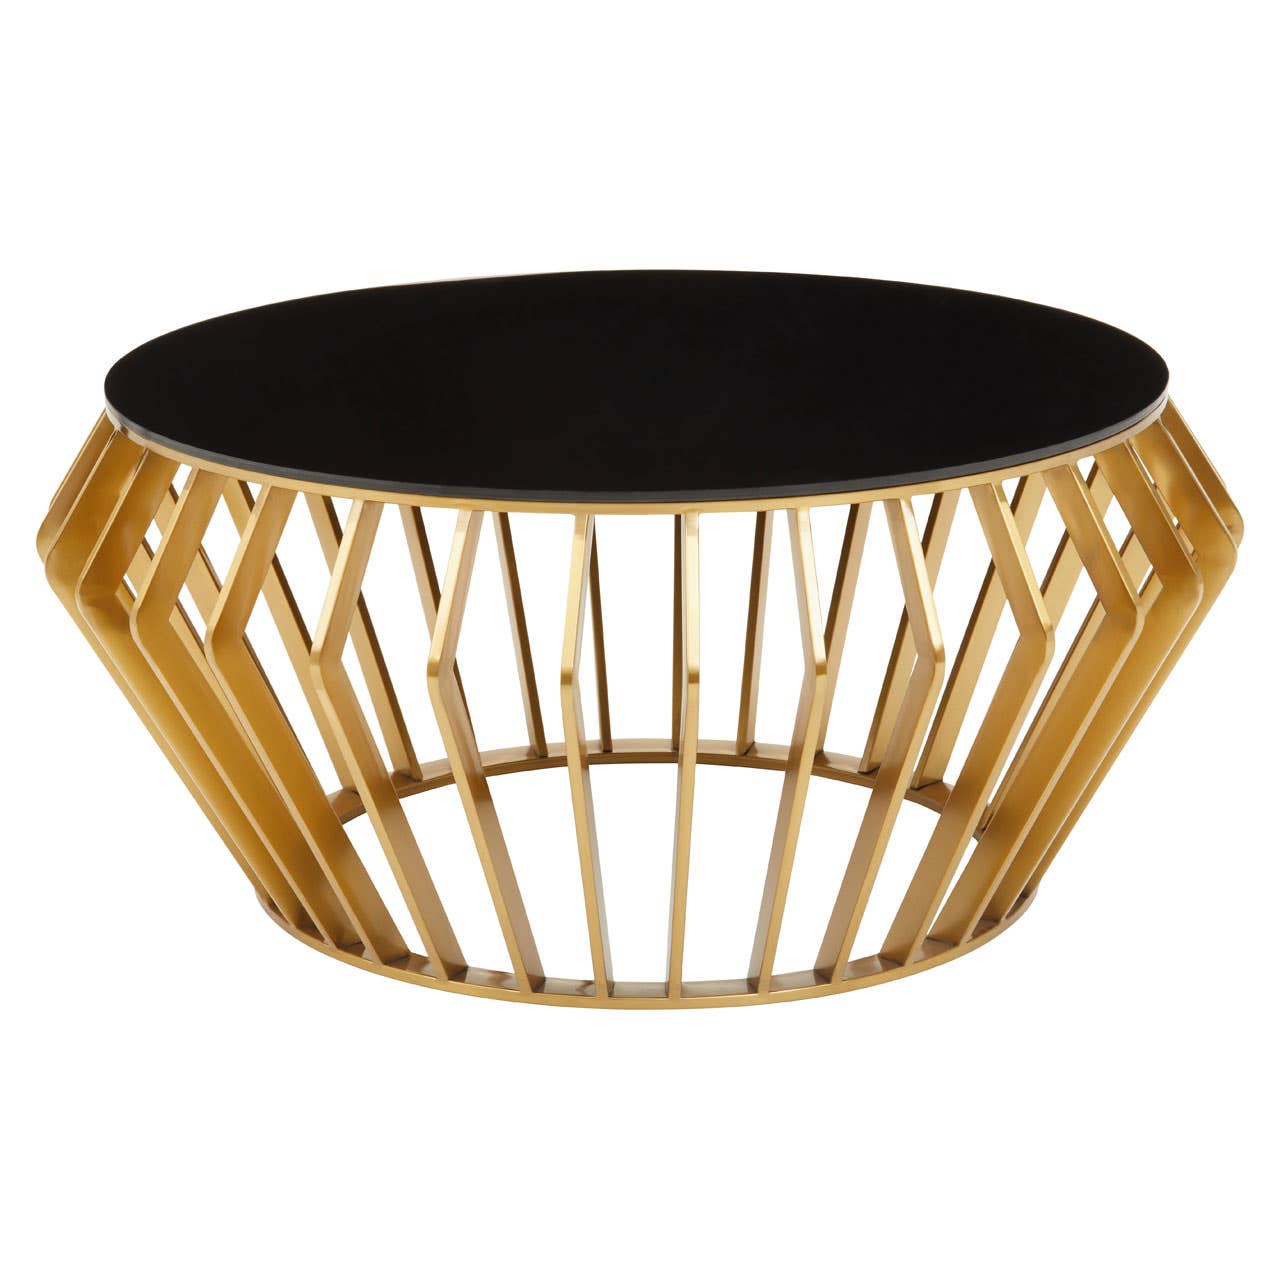 Ackley Black And Gold Round Coffee Table.